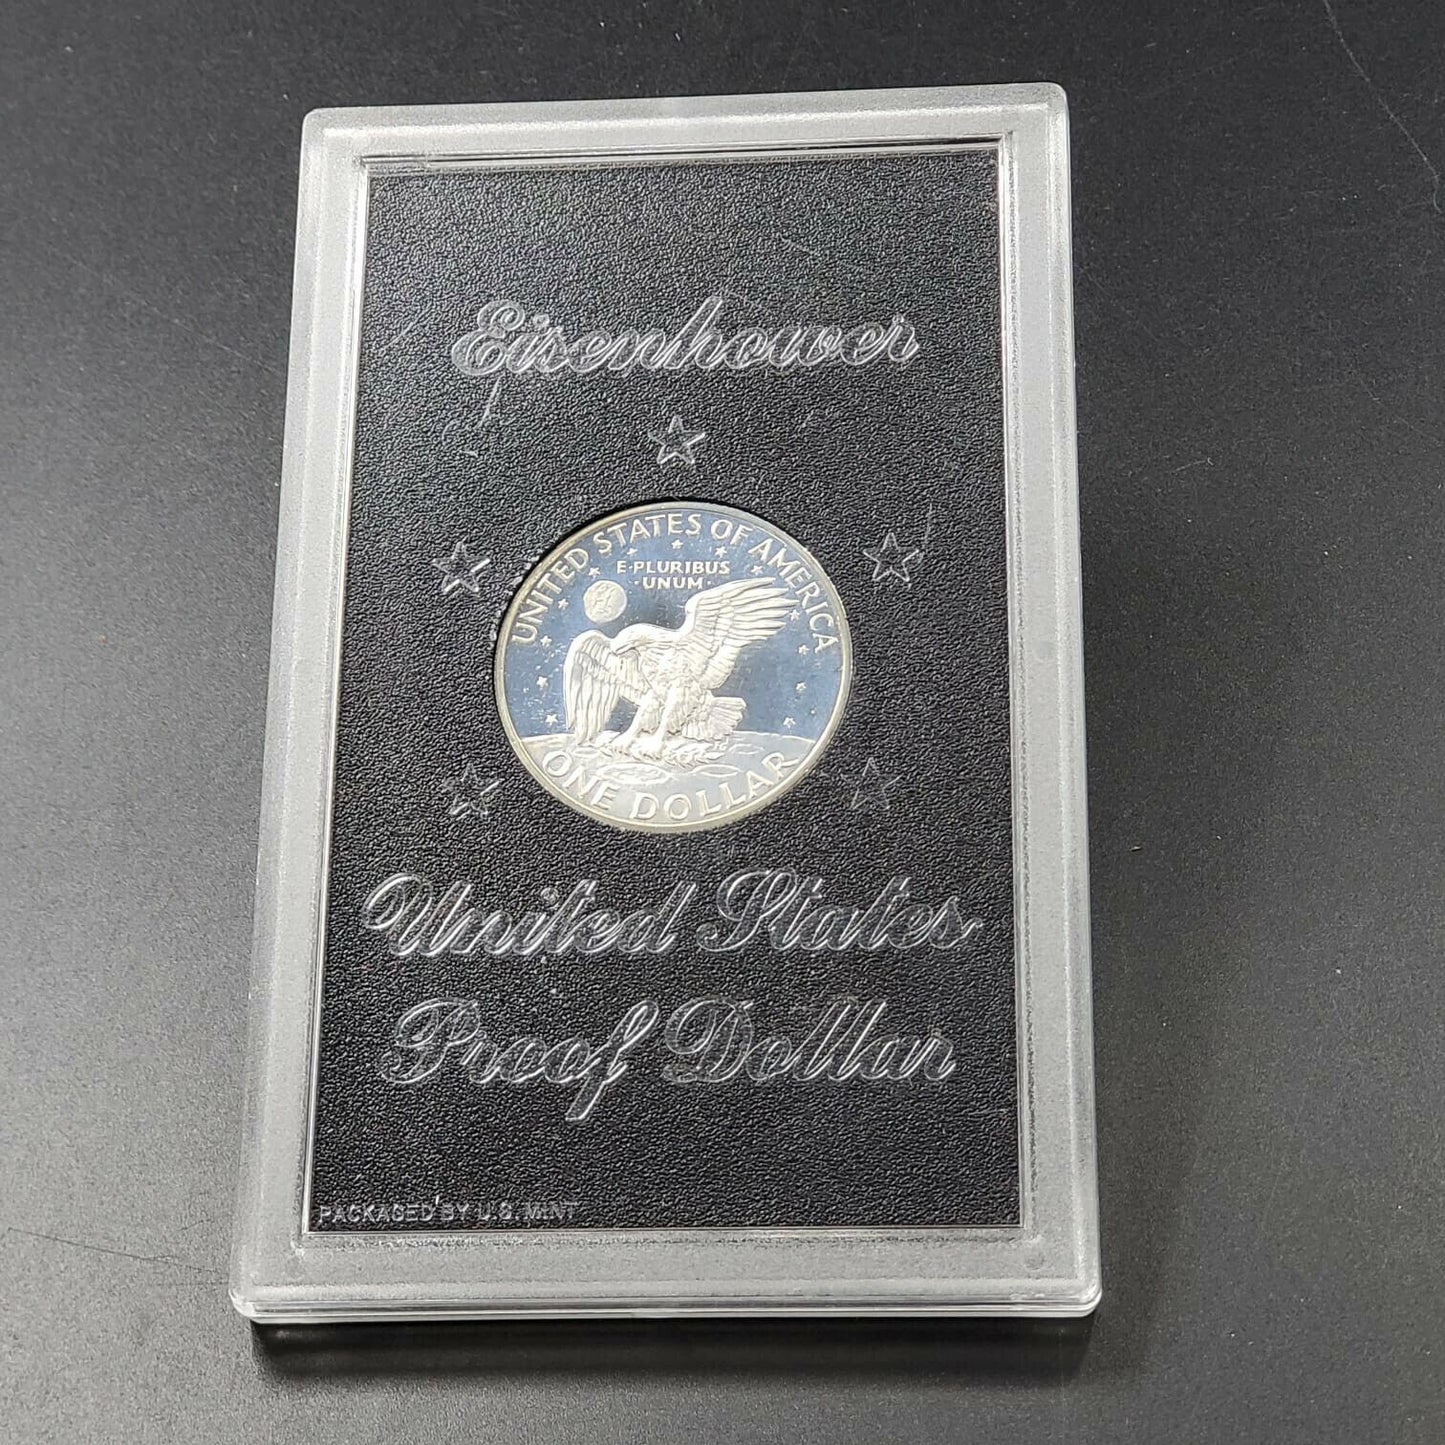 1971 S $1 Eisenhower Brown Ike 40% Proof Silver Dollar DCAM NICE COIN NICE CASE